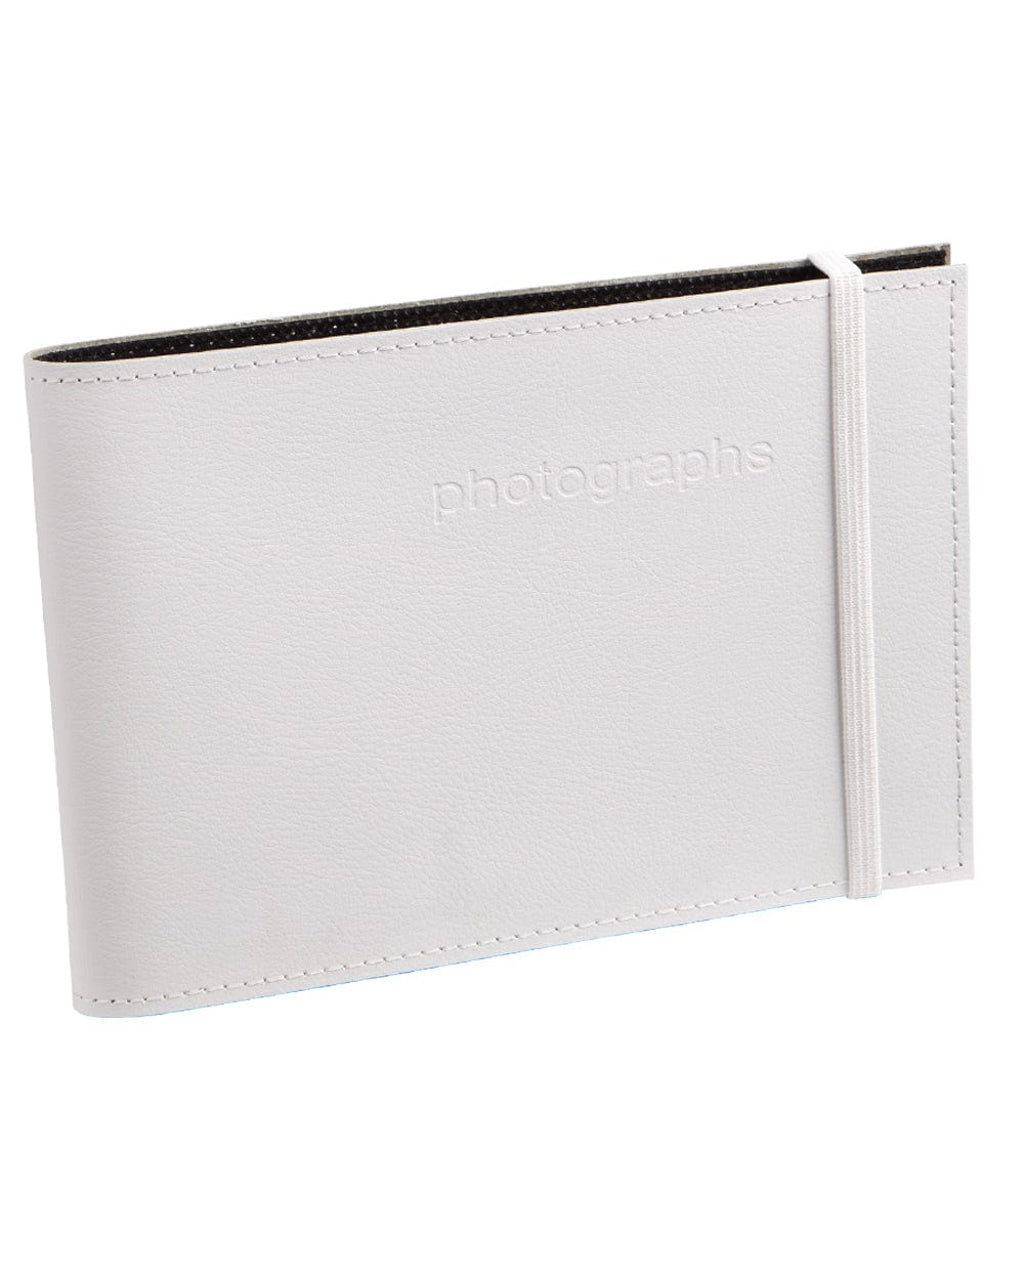 Citi Leather White Large 6x8in Slip-in Bragbook Photo Album from our Photo Albums collection by Profile Products Australia